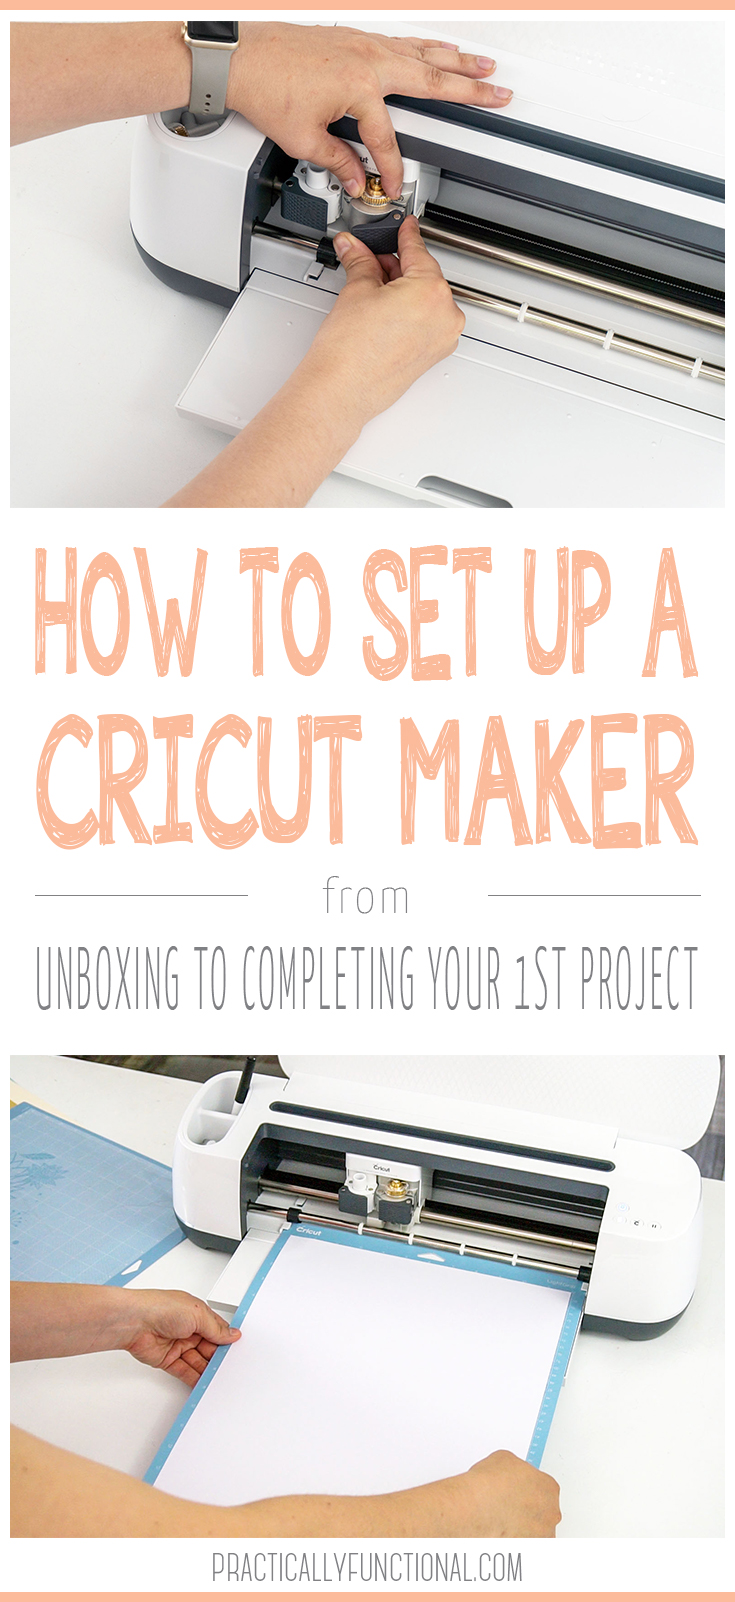 Cricut Maker 3 Guide for Beginners: A Comprehensive Guide to Setup and Use  the Cricut Maker 3 | Learn How to Master All Cricut Maker 3 Tools